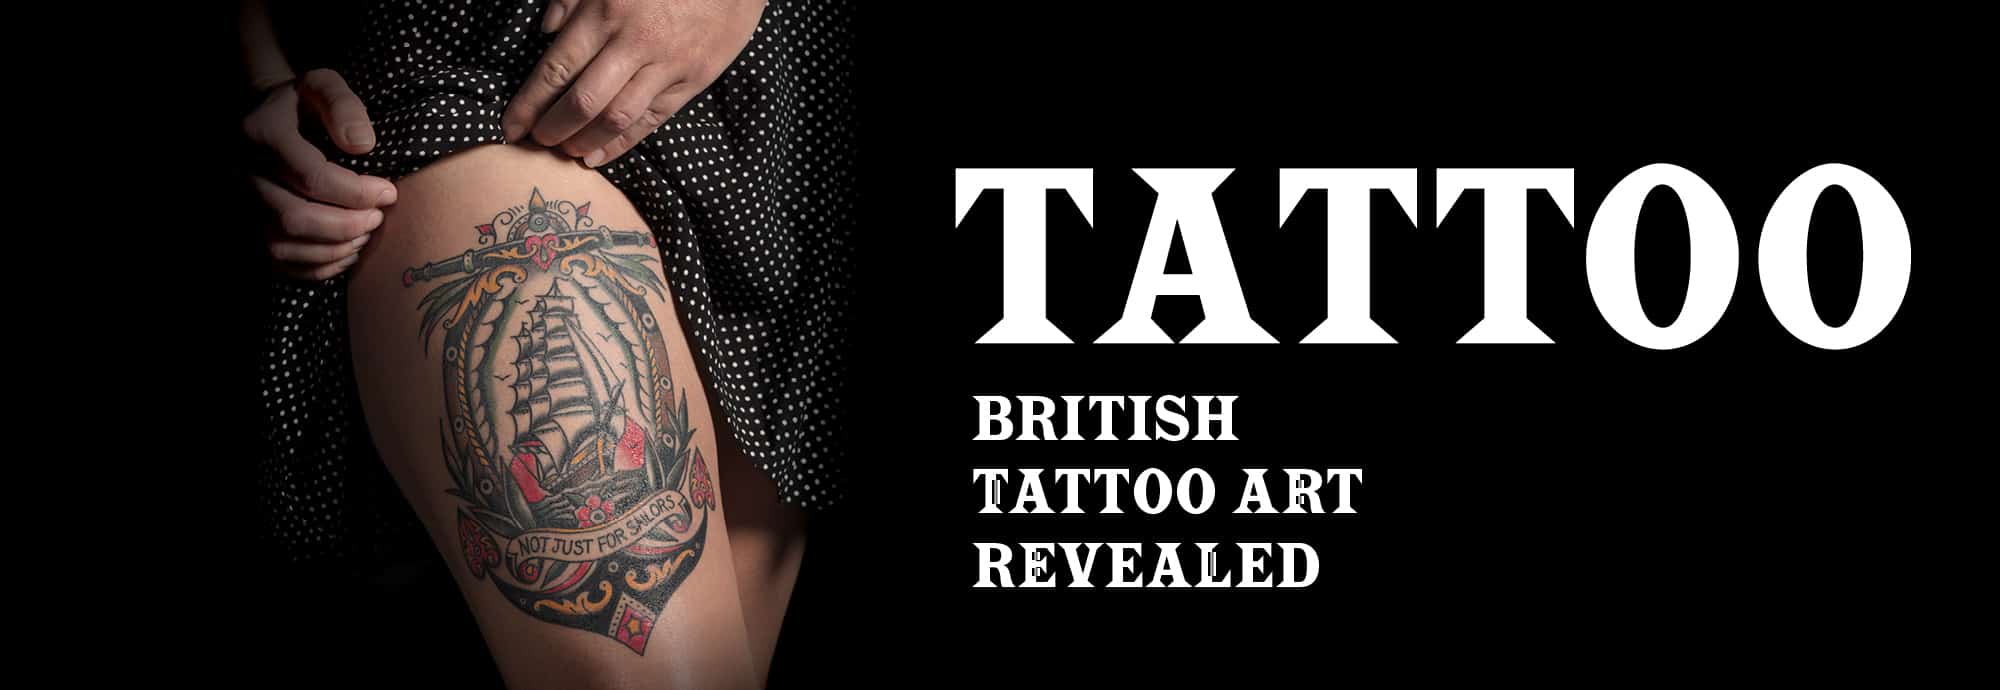 White text on the right against a black background reads 'Tattoo: British Tattoo Art Revealed'. On the left, a woman shows a tattoo on her thigh that depicts a sailing ship and has the writing 'not just for sailors' underneath.